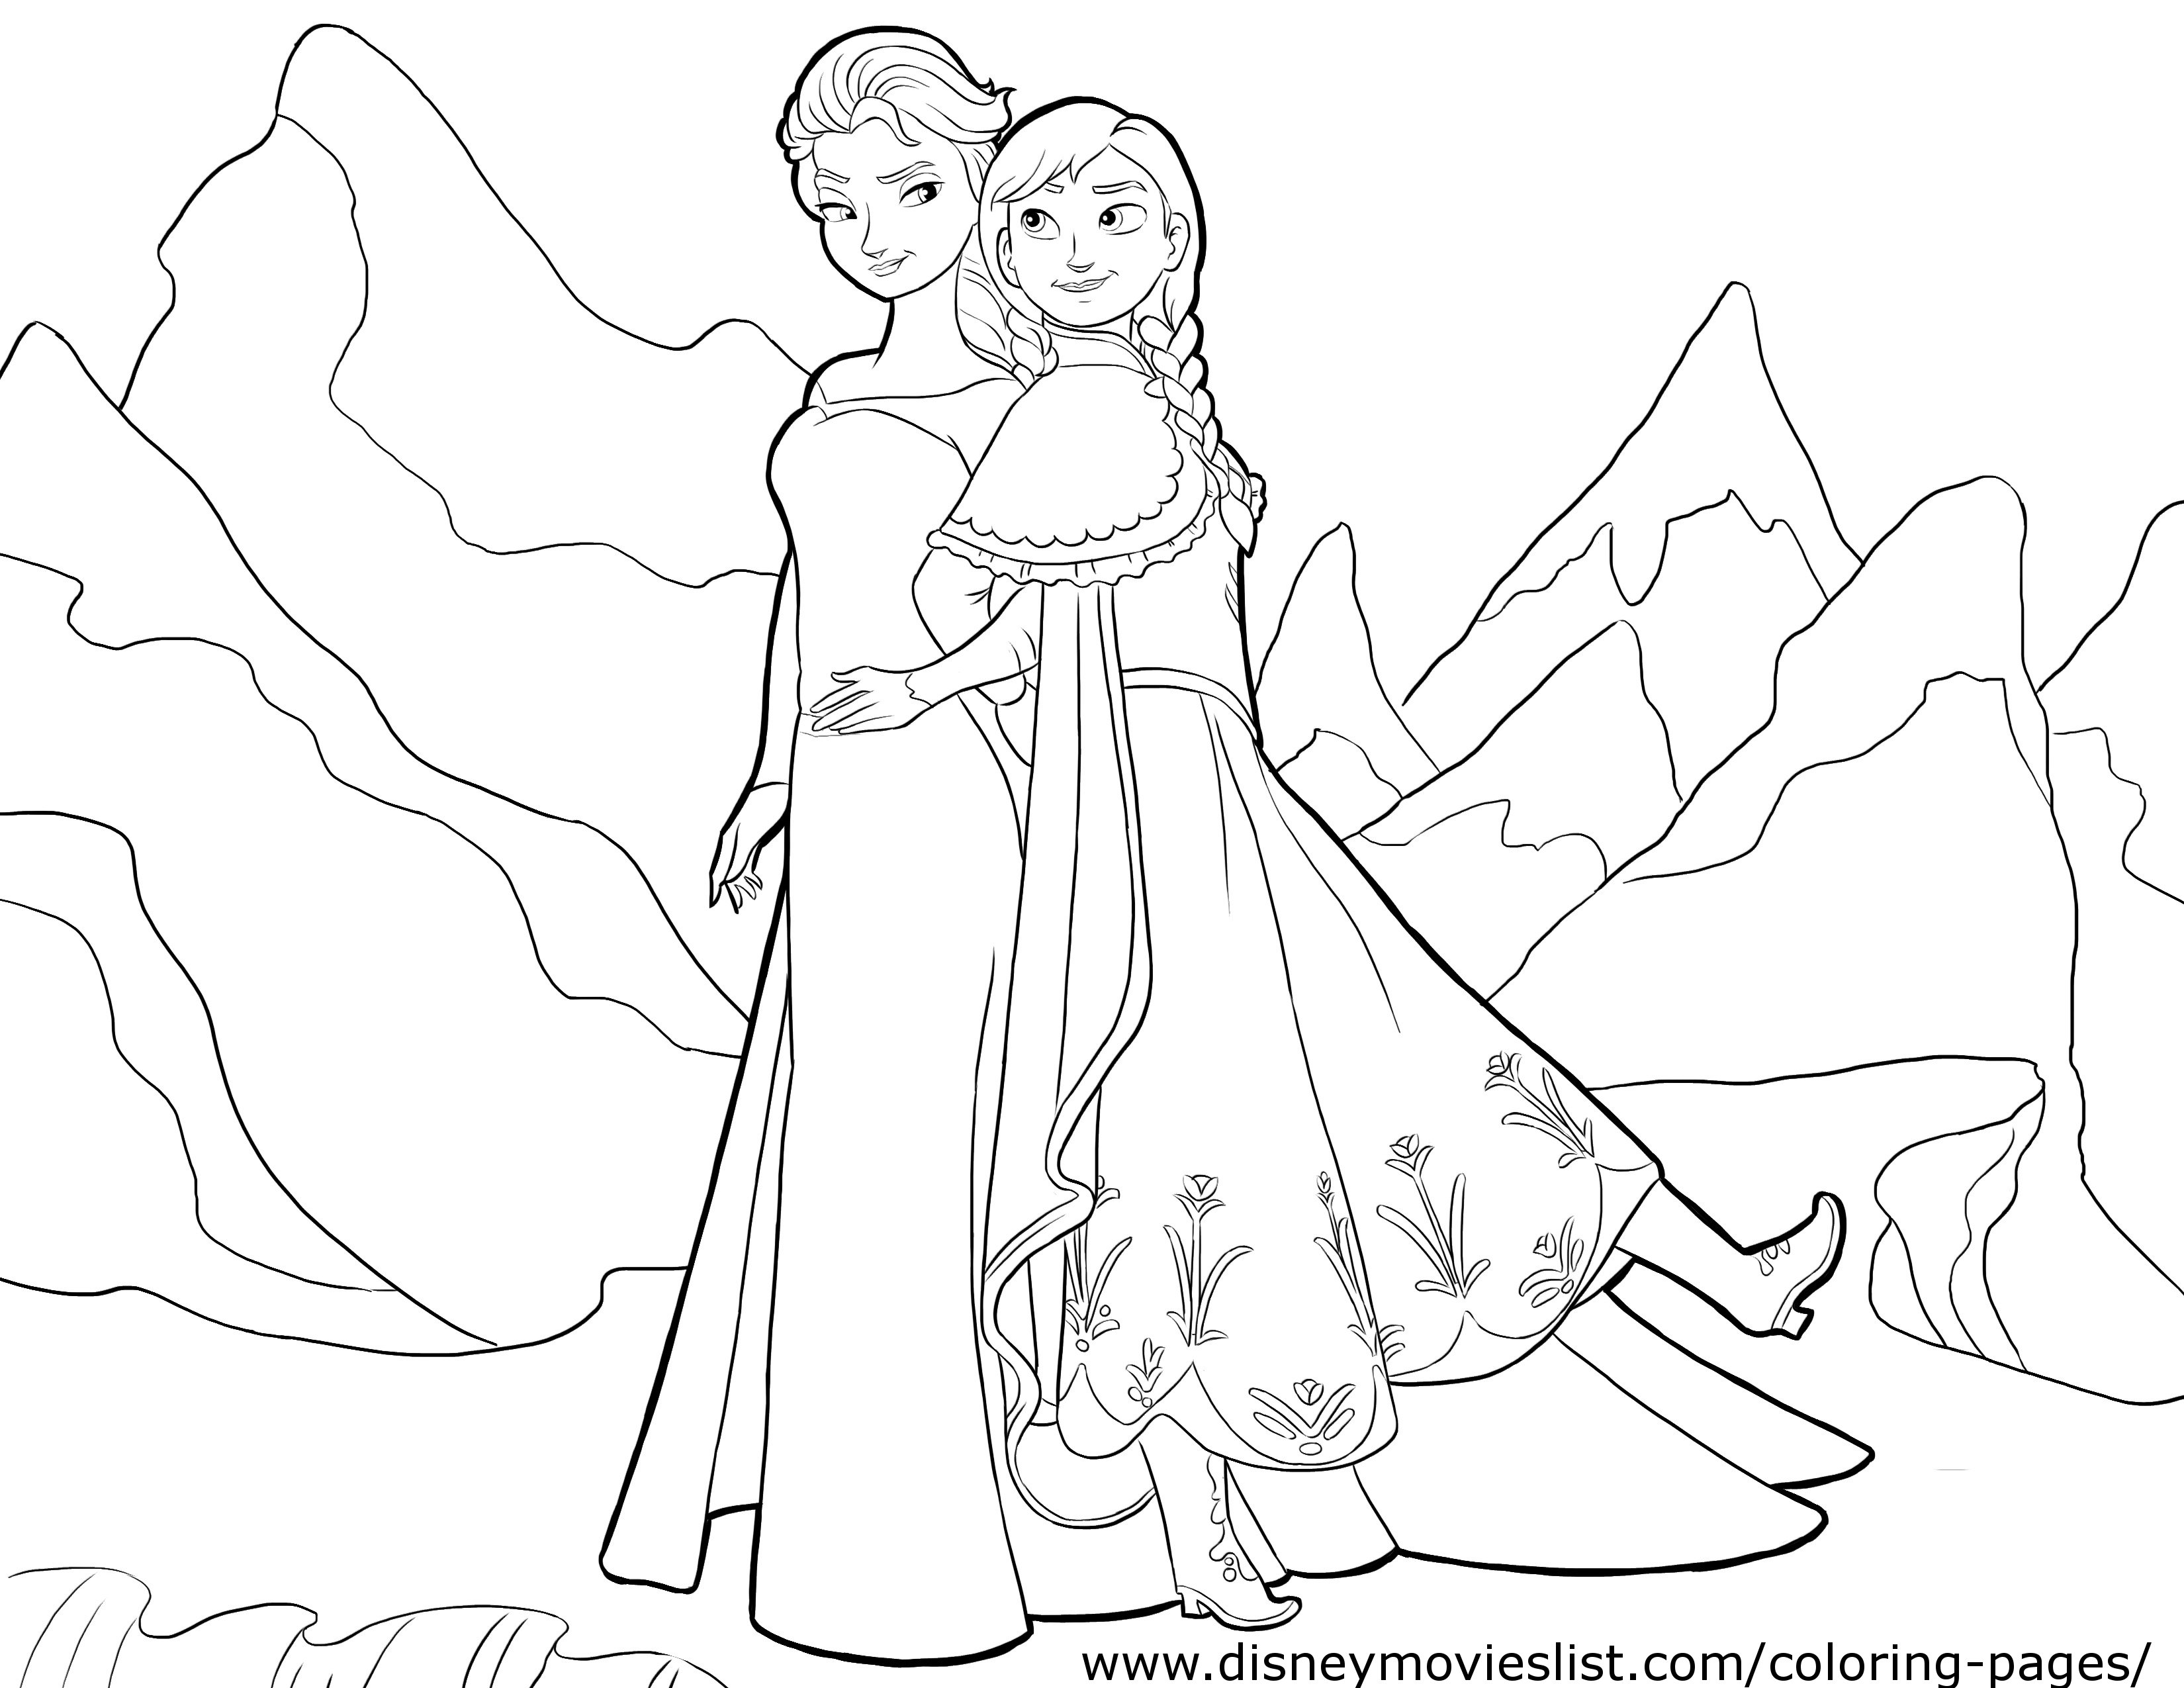 Frozen coloring #4, Download drawings